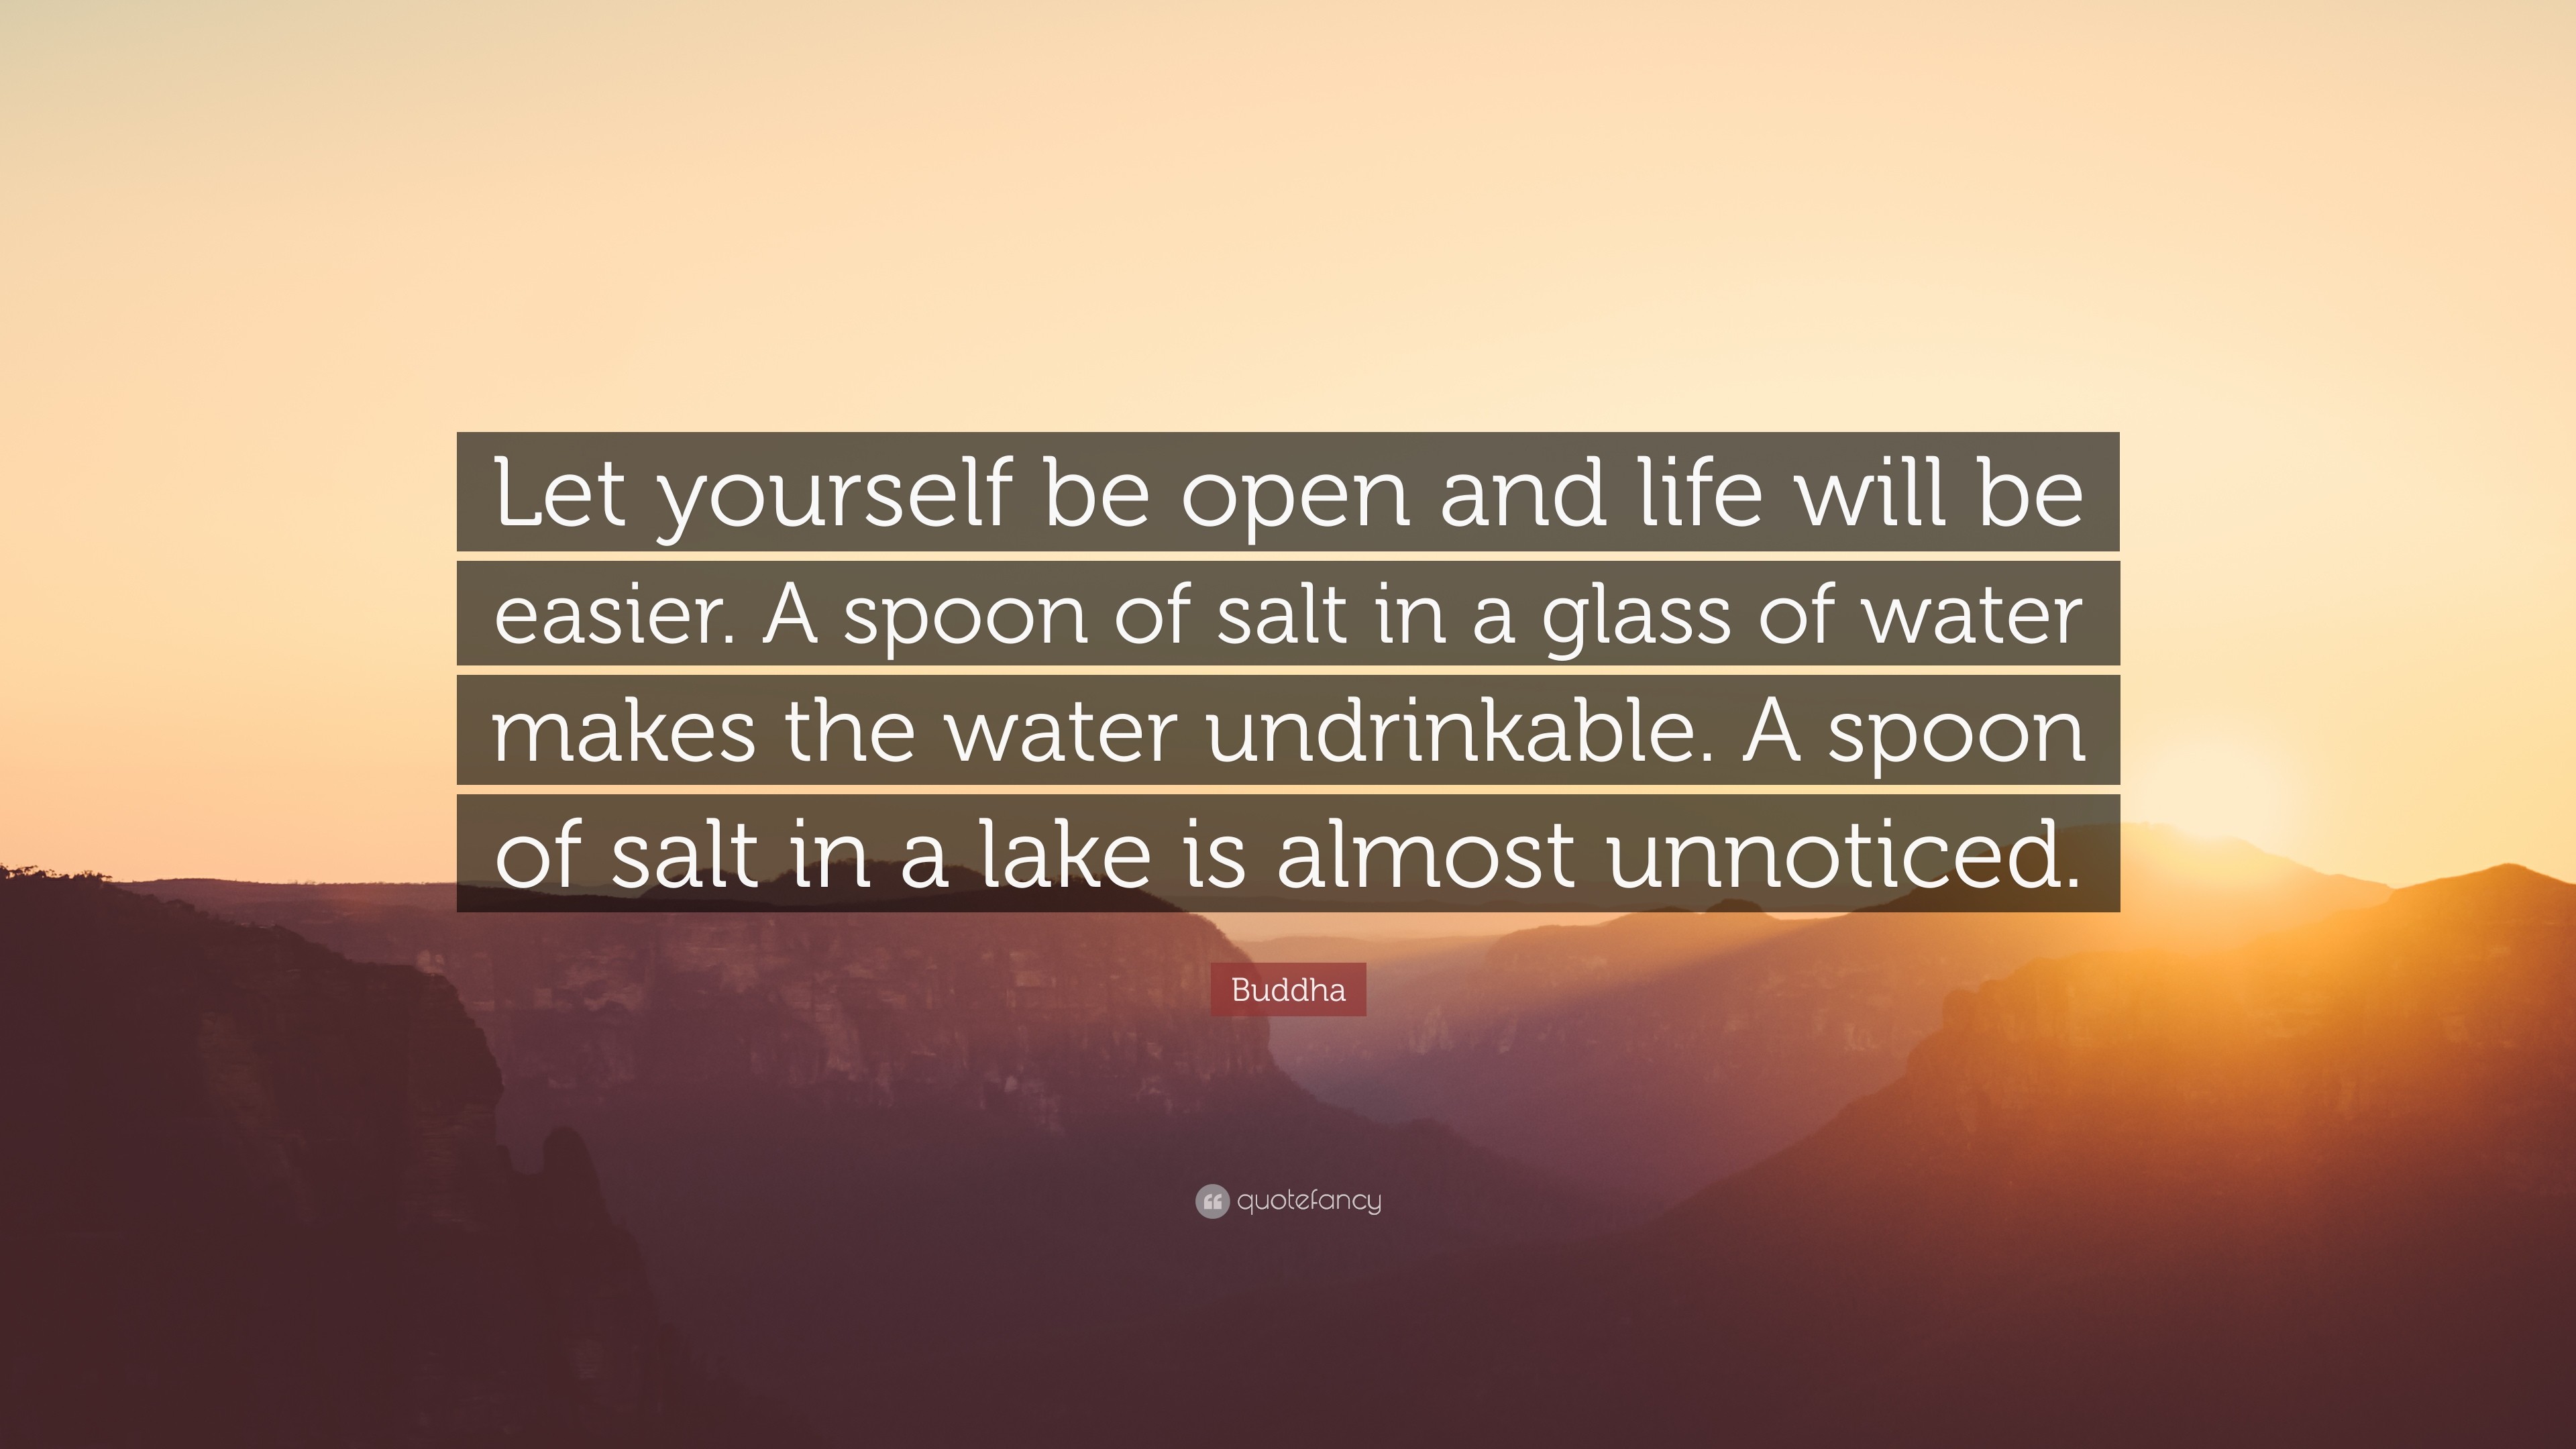 3840x2160 Buddha Quote: “Let yourself be open and life will be easier. A spoon